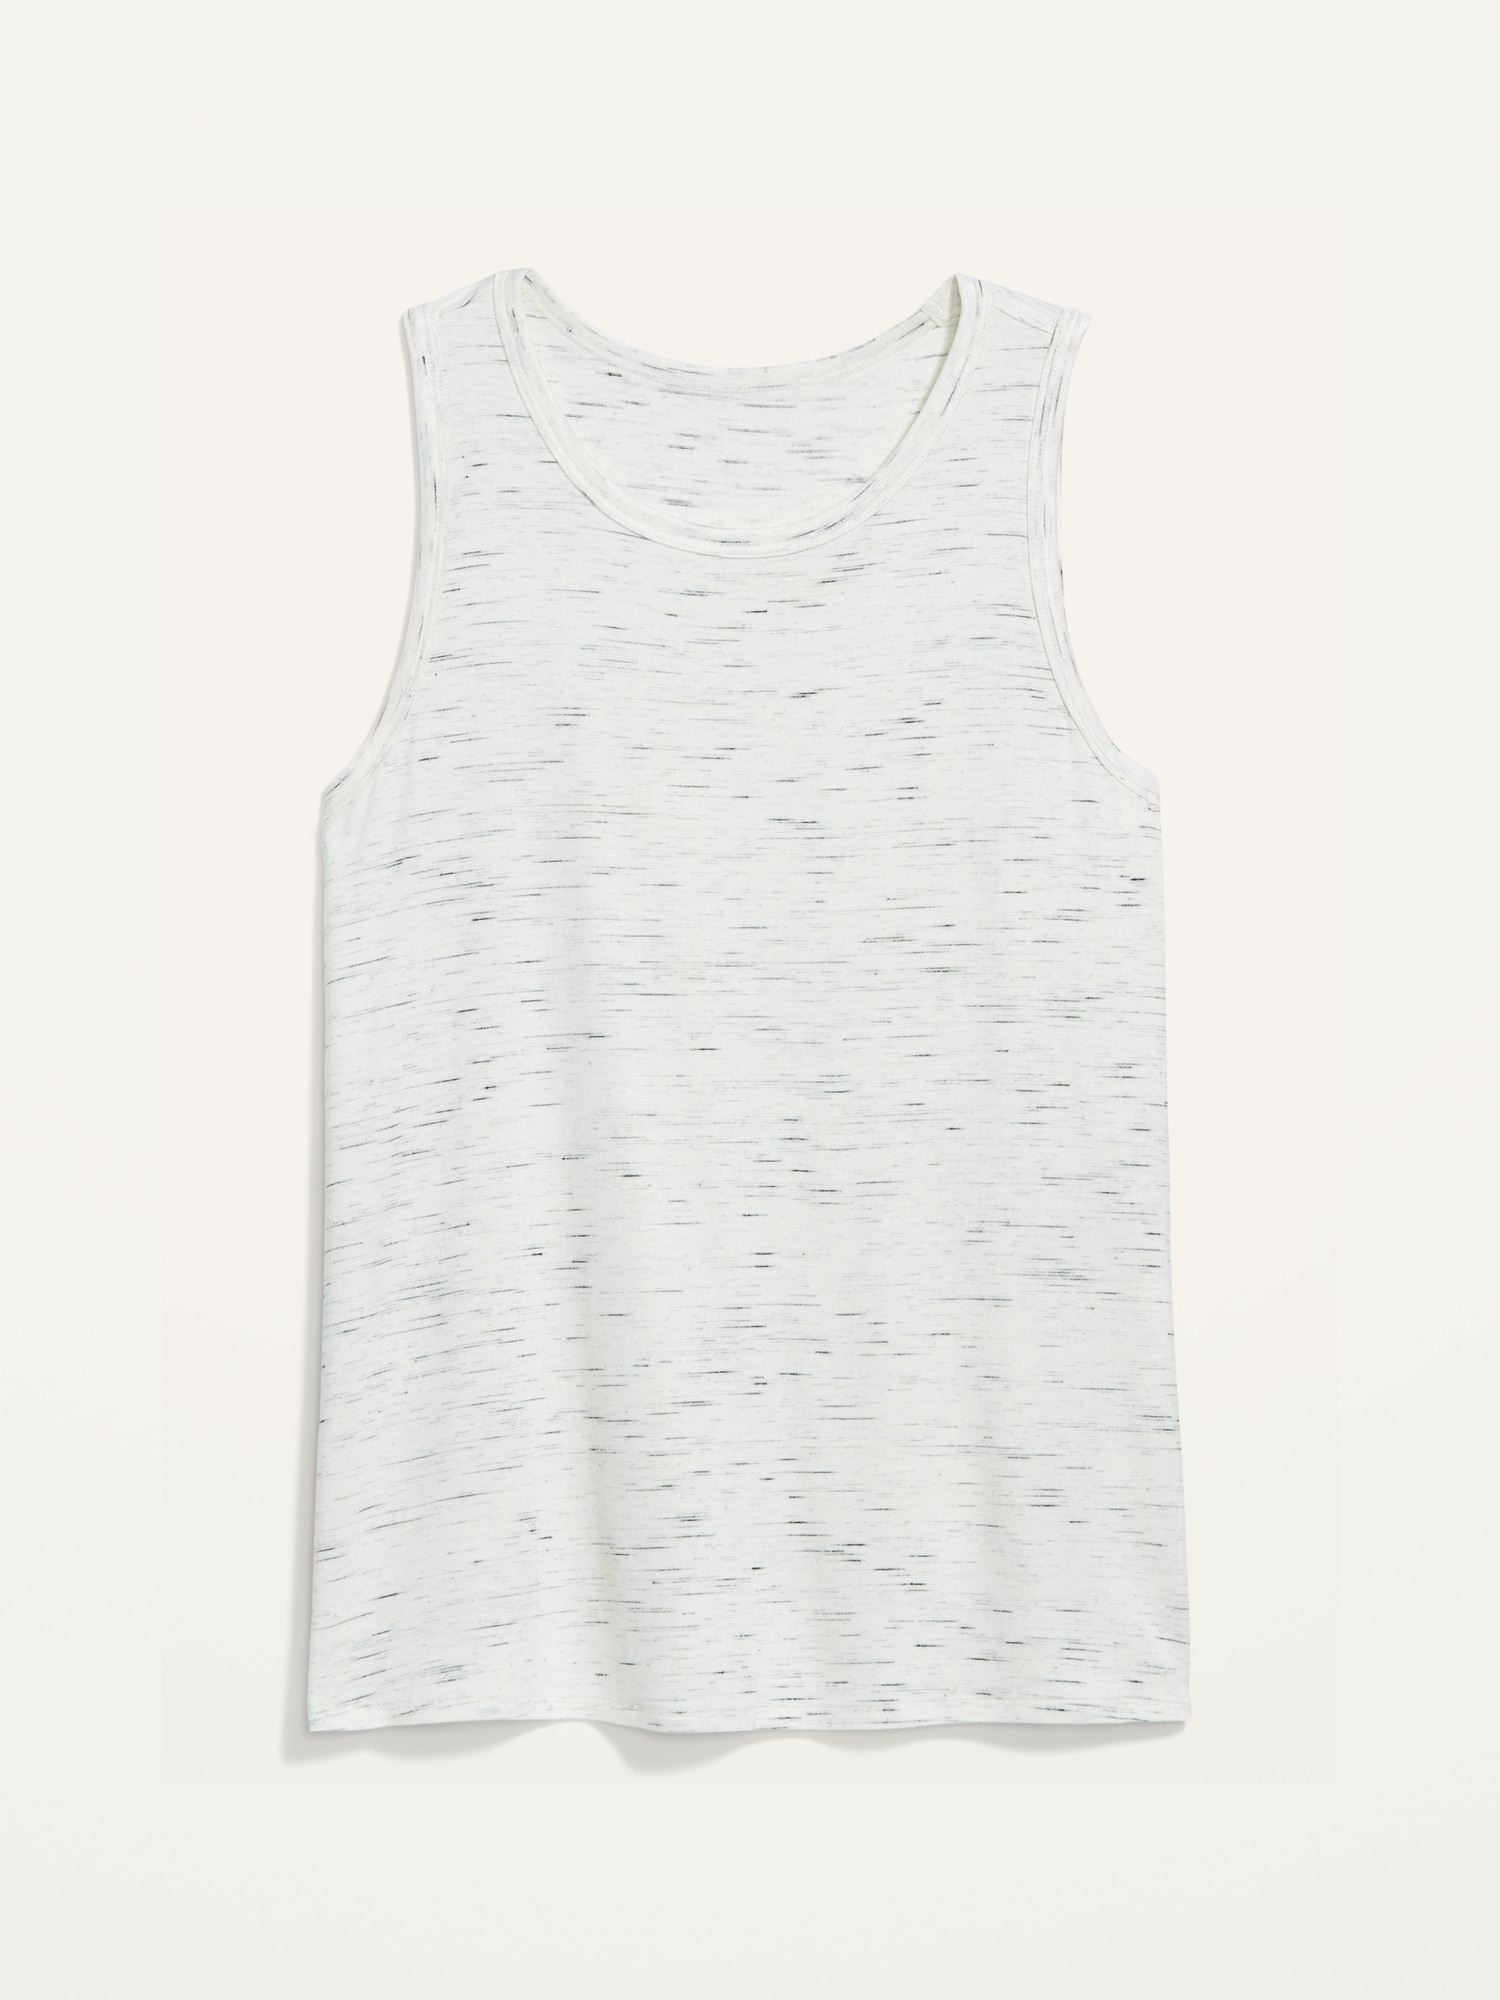 Old Navy Women's Luxe Jersey-Knit Sleeveless T-Shirt - White - Plus Size 3X